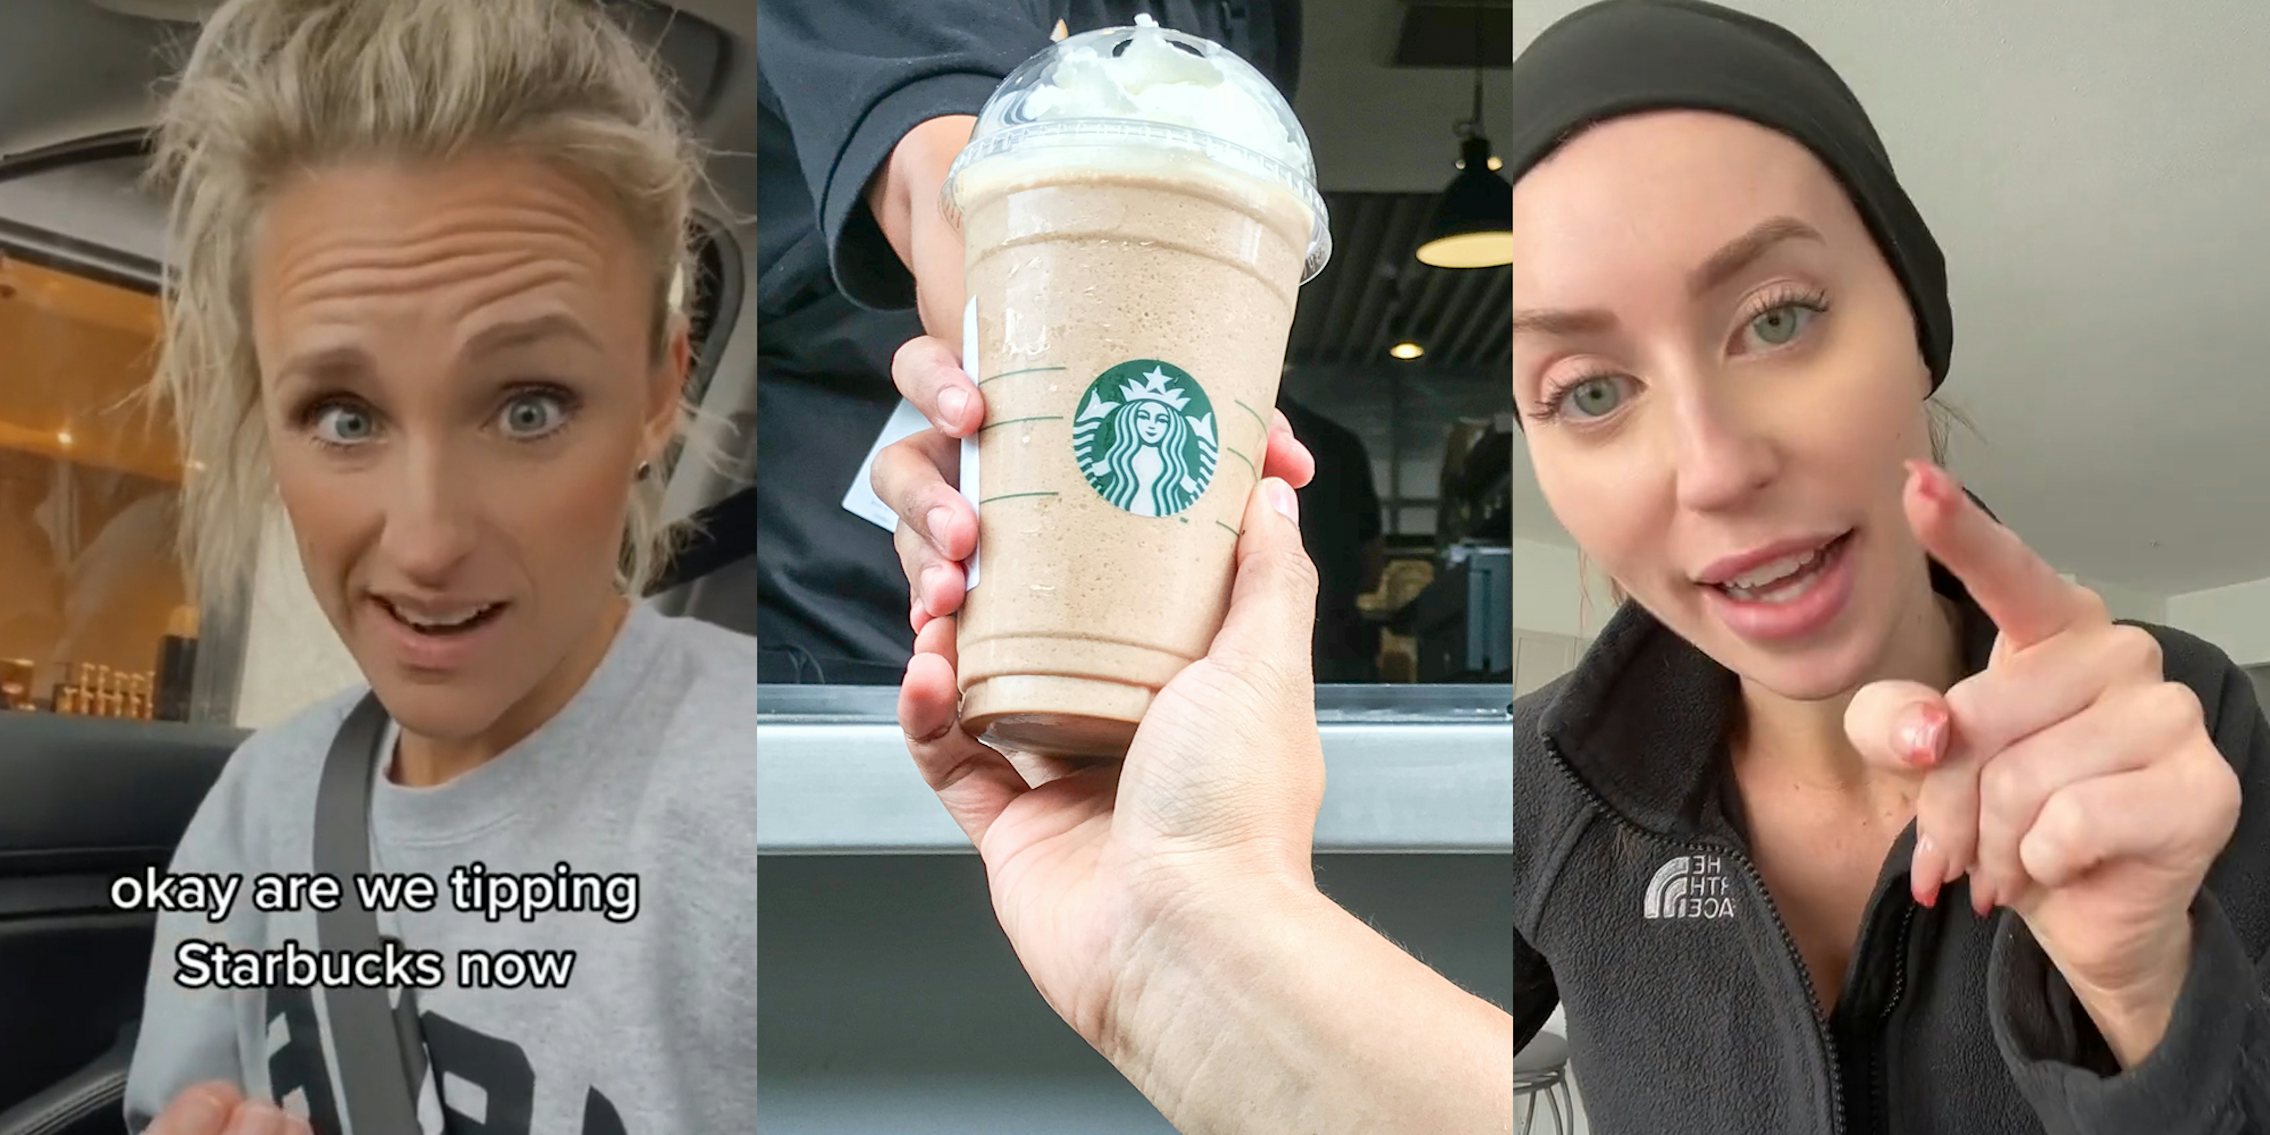 woman speaking in car with caption 'okay are we tipping Starbucks now' (l) Starbucks drive thru window employee handing customer drink in cup (c) woman speaking pointing finger in front of white walls (r)